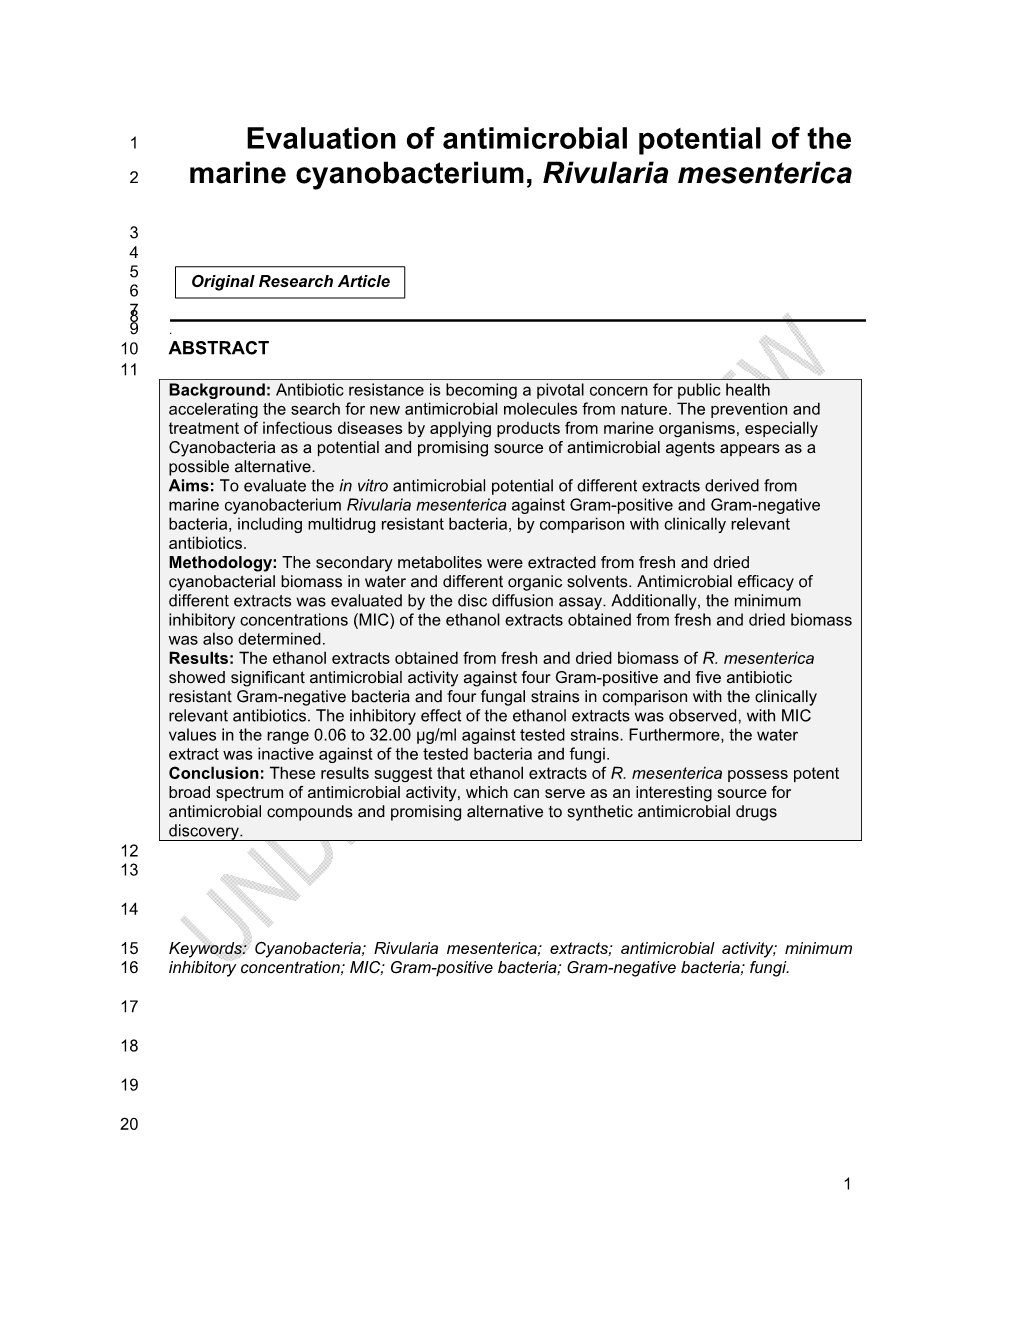 Evaluation of Antimicrobial Potential of the Marine Cyanobacterium